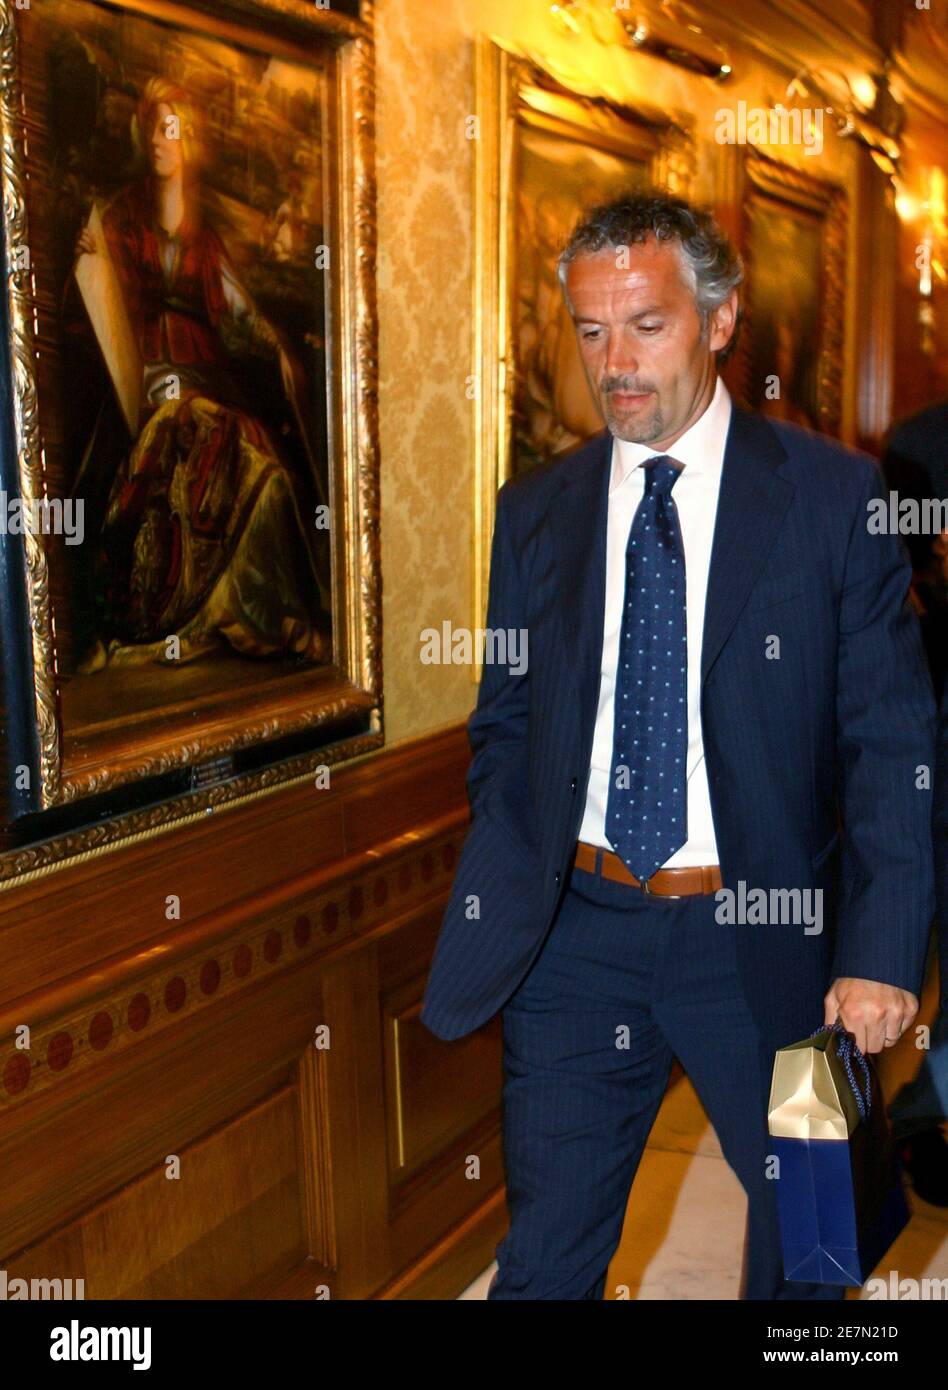 Italy's new national soccer team coach Roberto Donadoni leaves a news conference in Rome July 18, 2006.     REUTERS/Giampiero Sposito (ITALY) Stock Photo